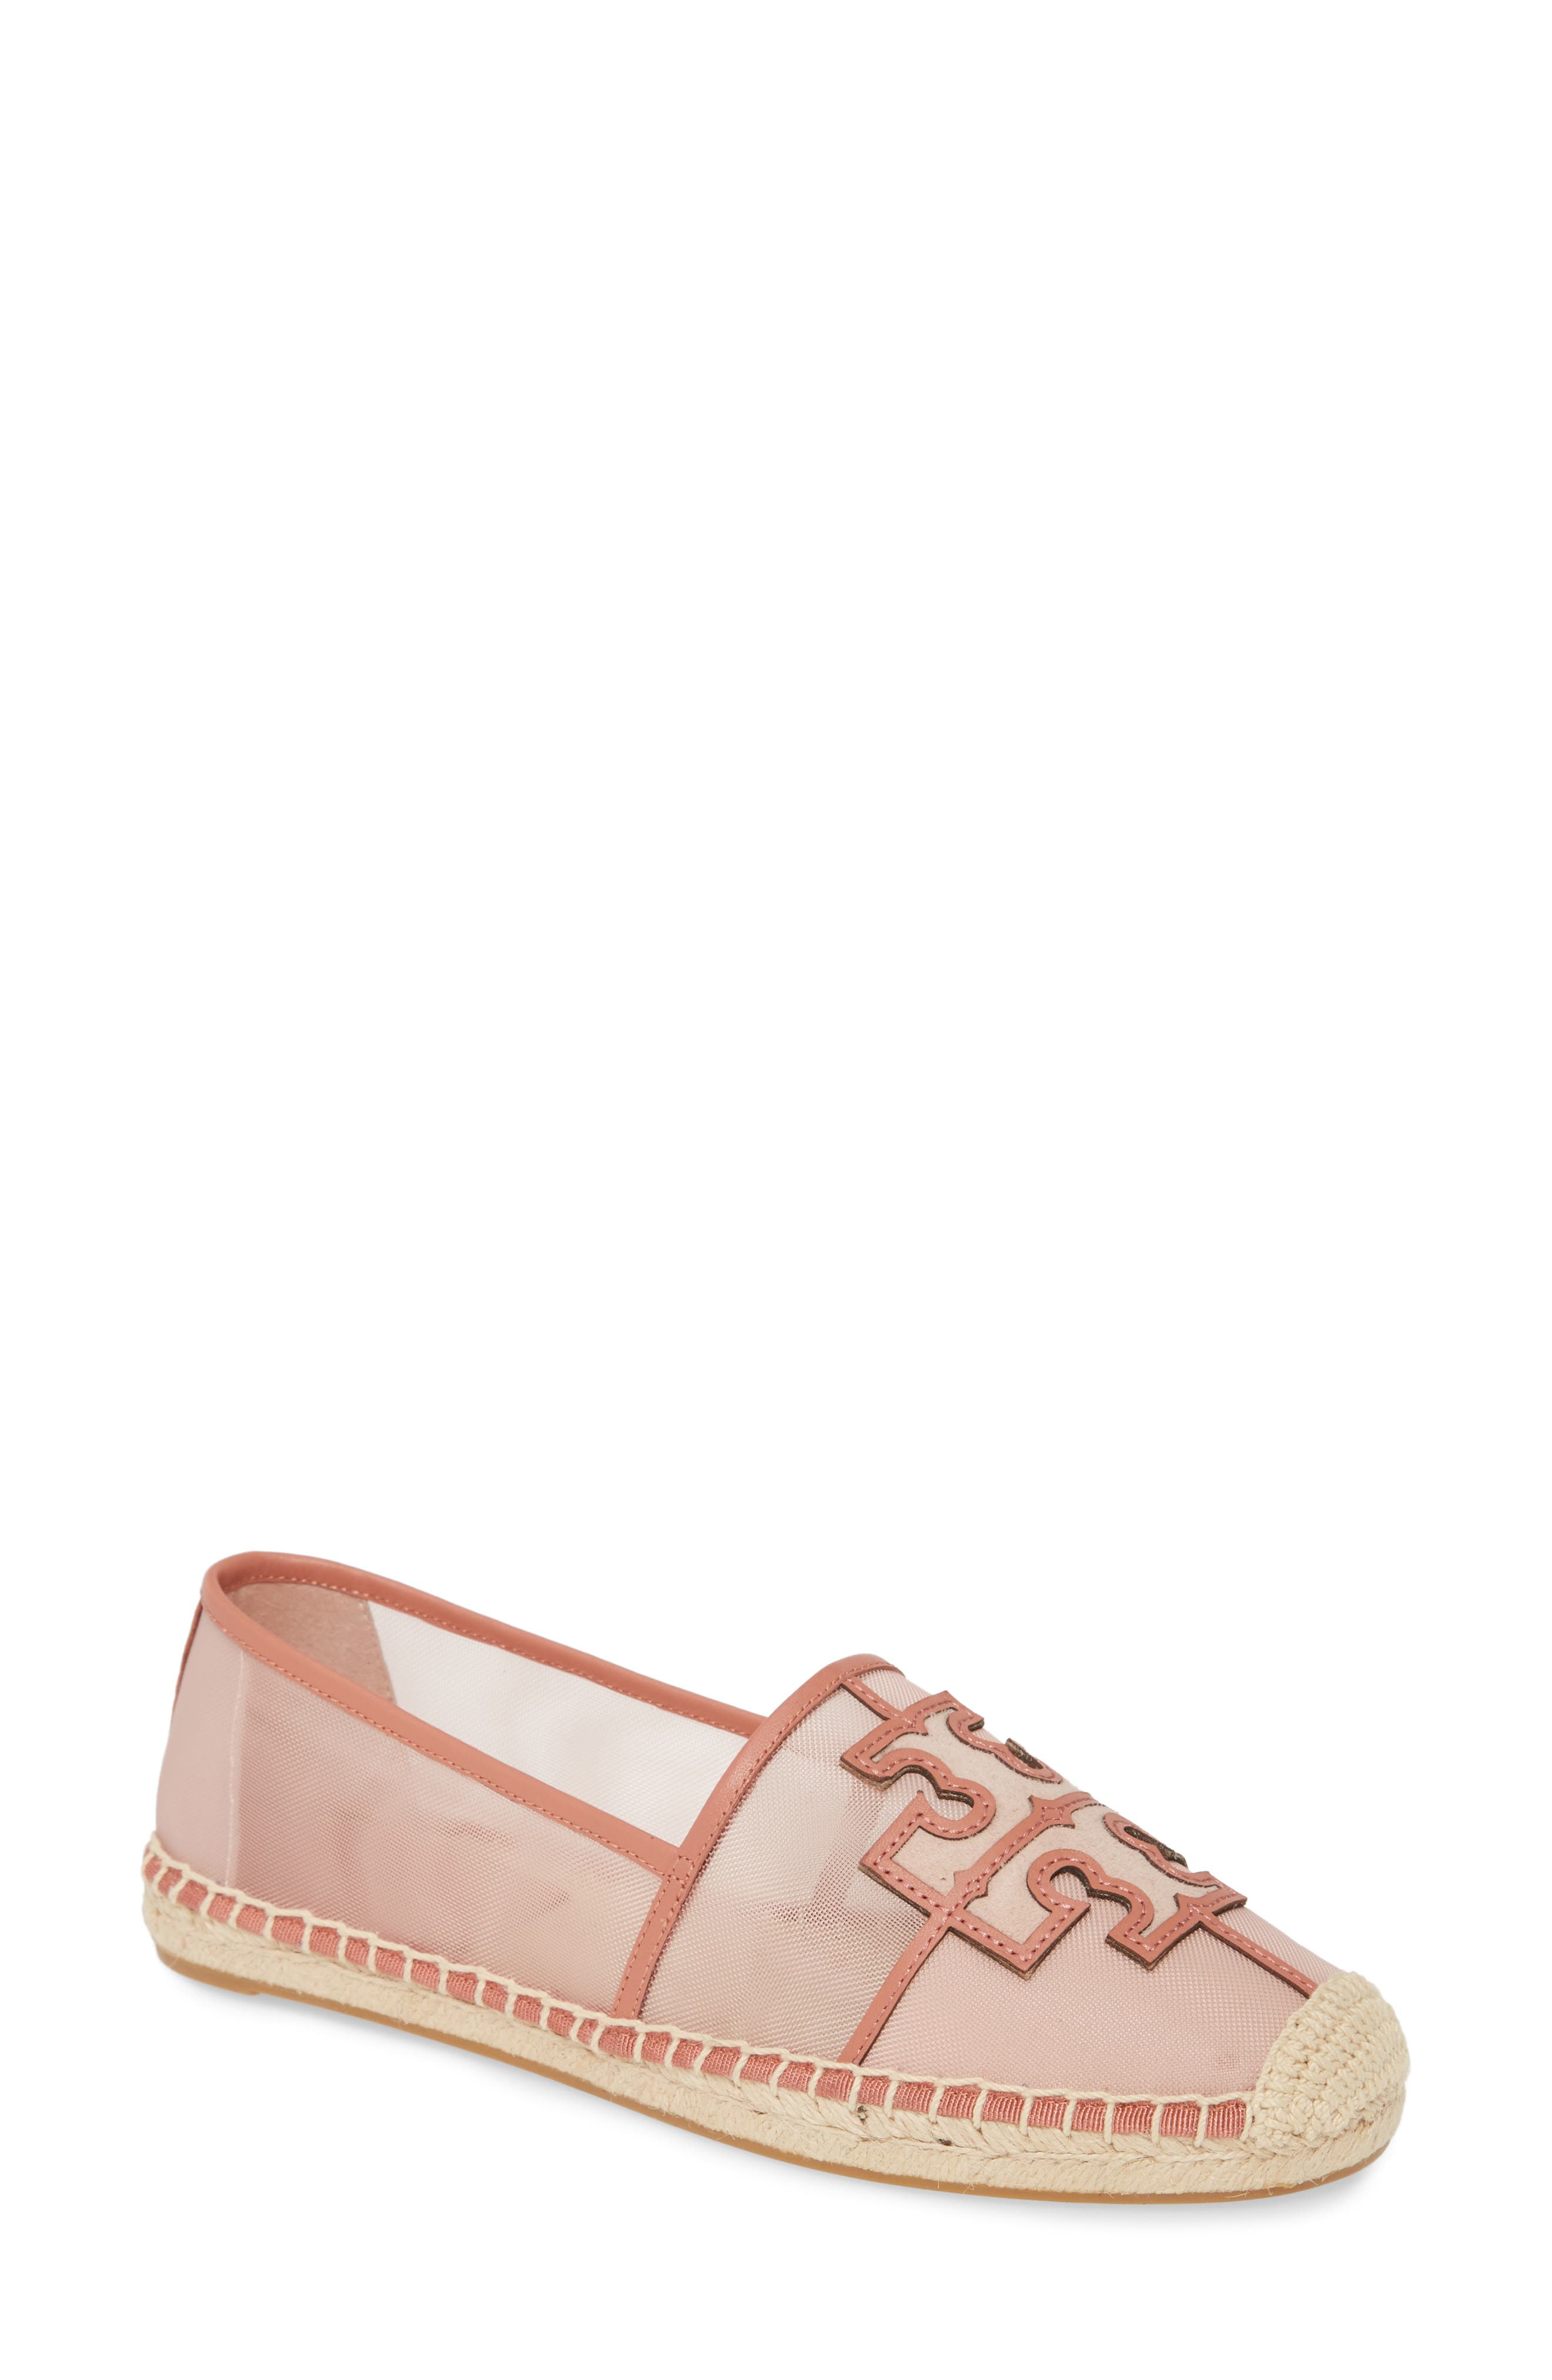 tory burch ines espadrille pink